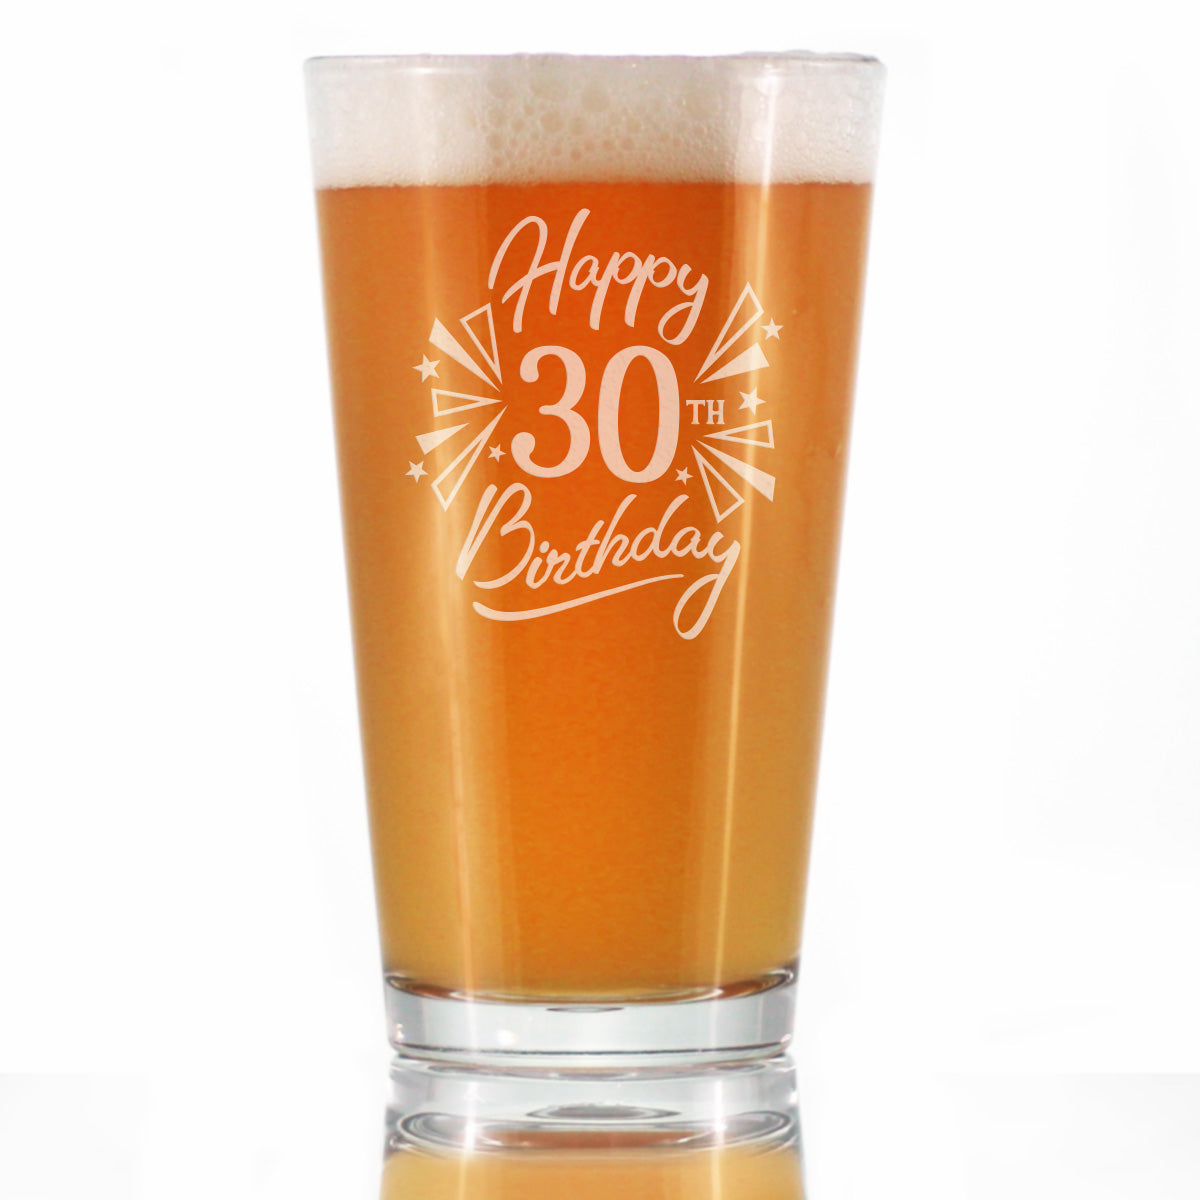 Happy 30th Birthday - Pint Glass for Beer - Gifts for Women &amp; Men Turning 30 - Fun Bday Party Decor - 16 Oz